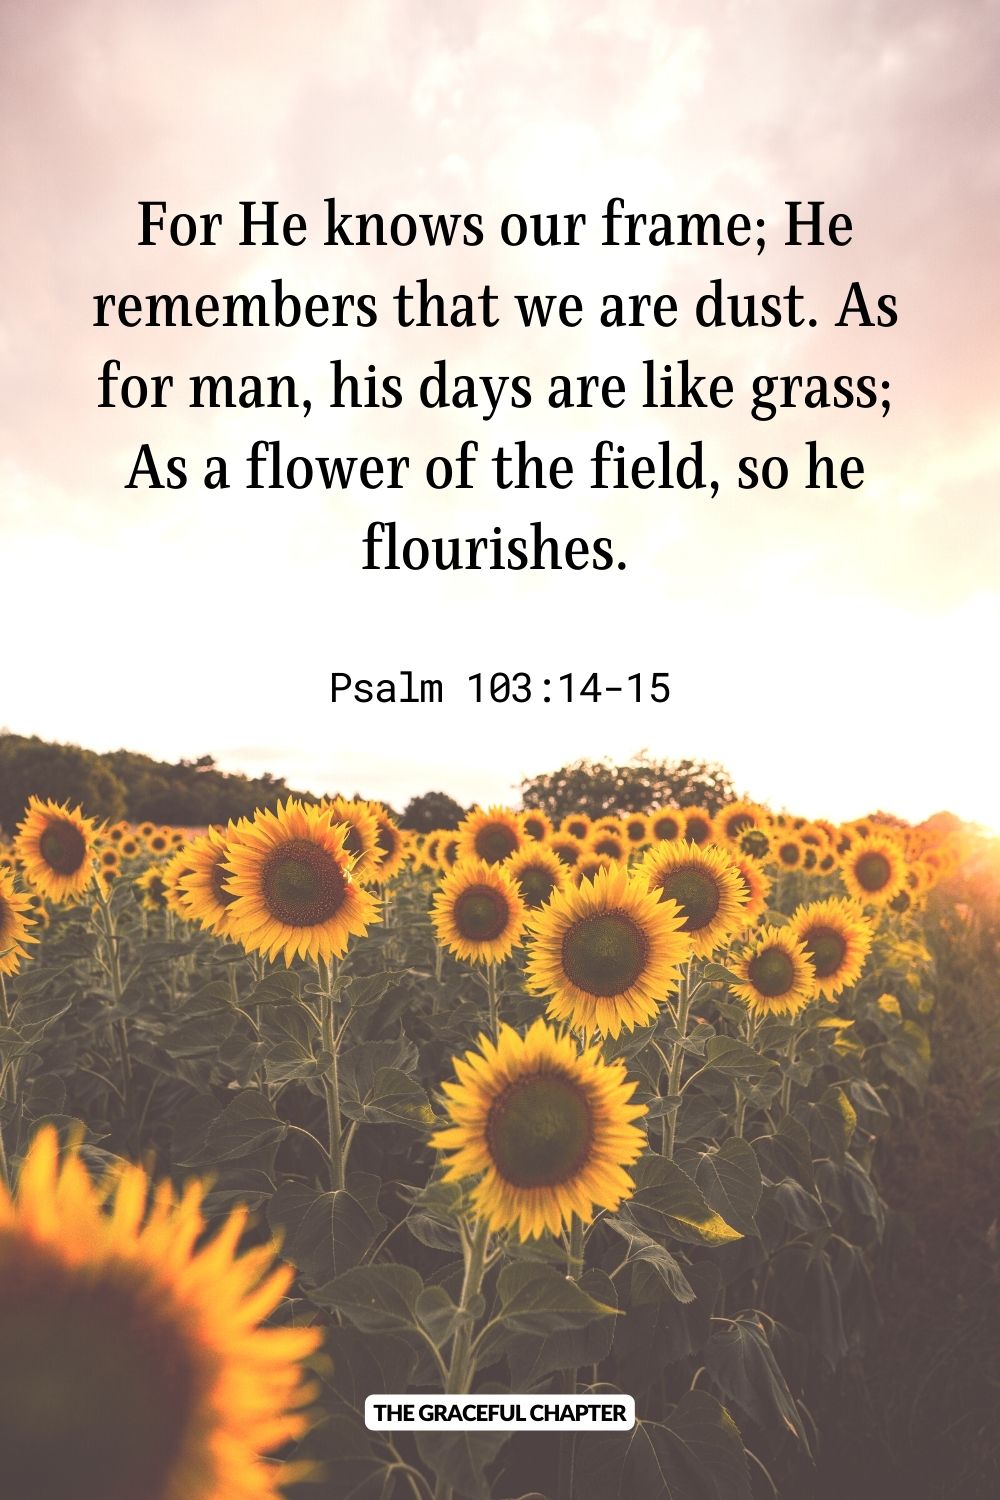 For He knows our frame; He remembers that we are dust. As for man, his days are like grass; As a flower of the field, so he flourishes. Psalm 103:14-15